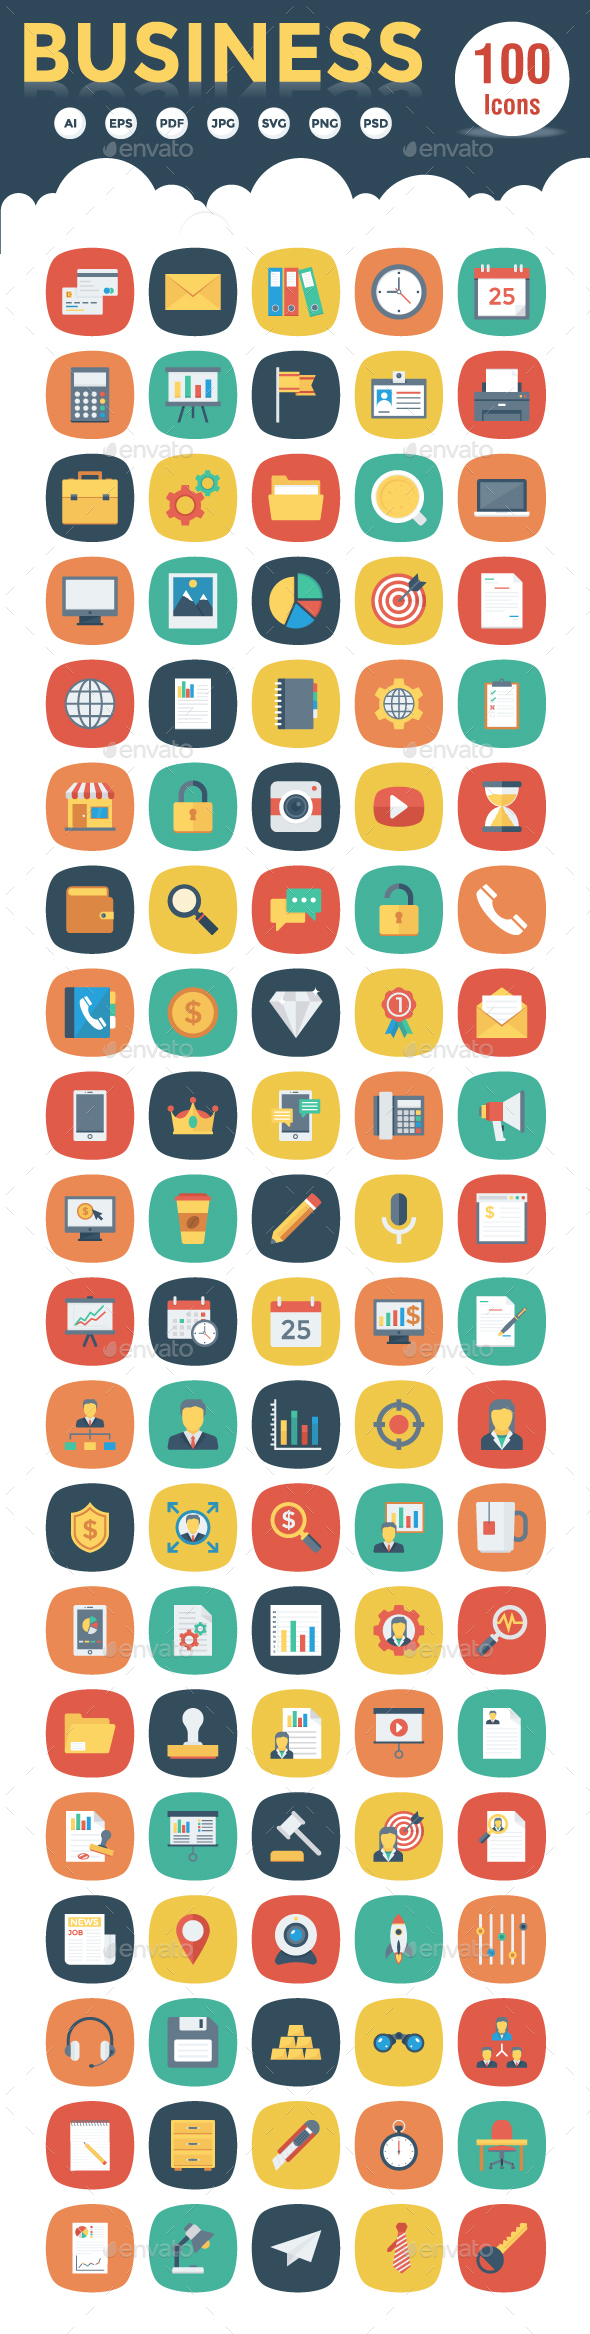 100 Business Flat Square Icons